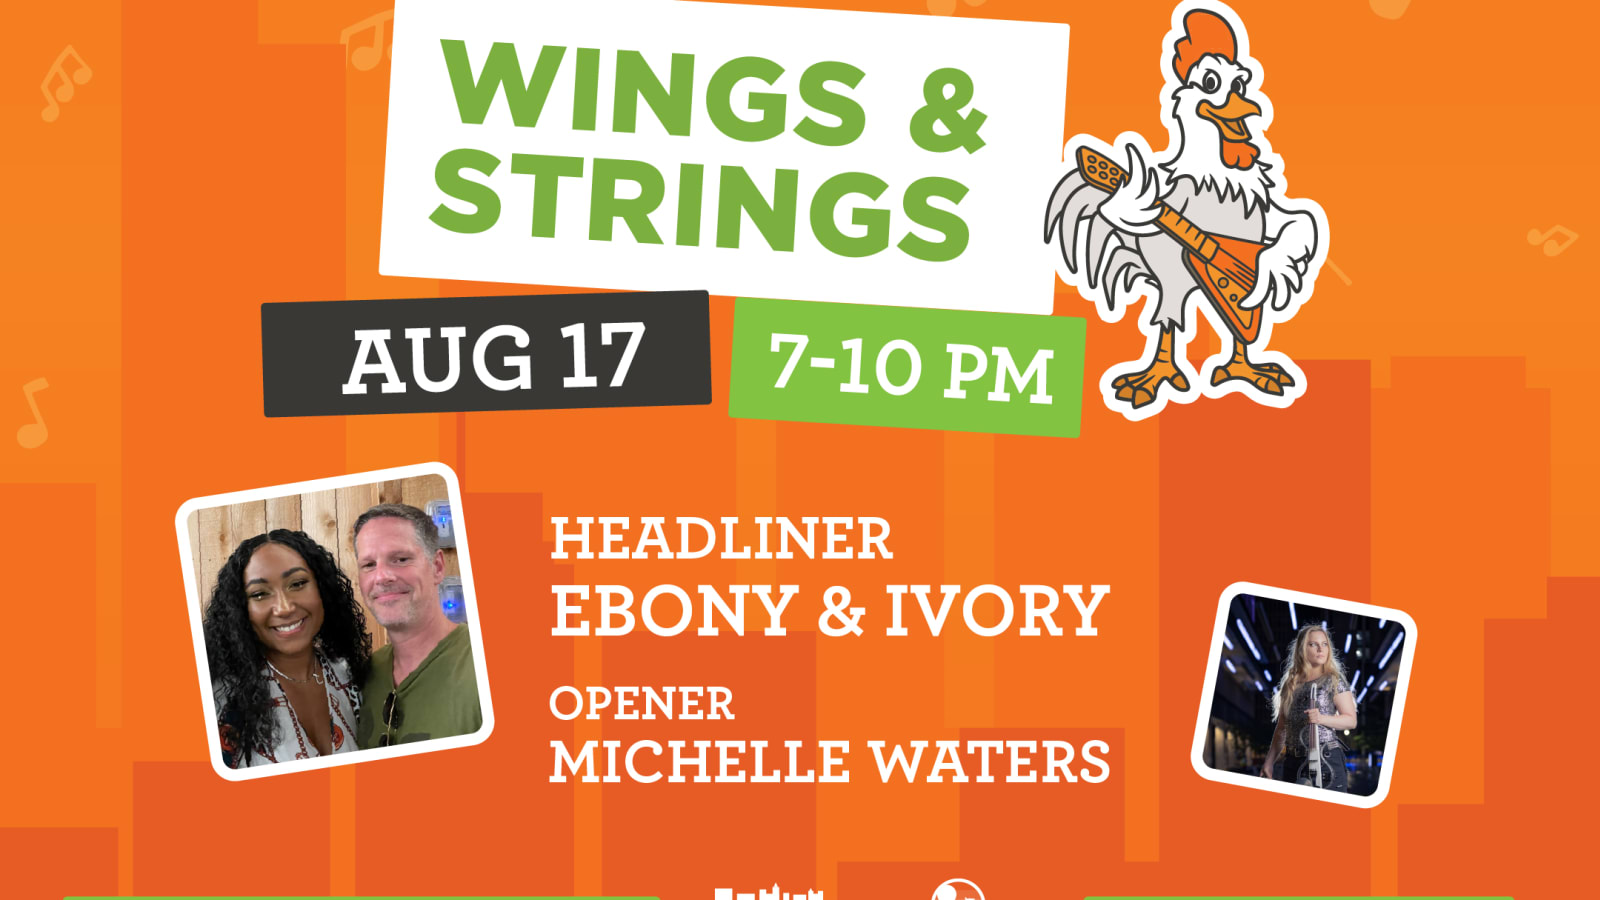 Downtown Live: Wings & Strings